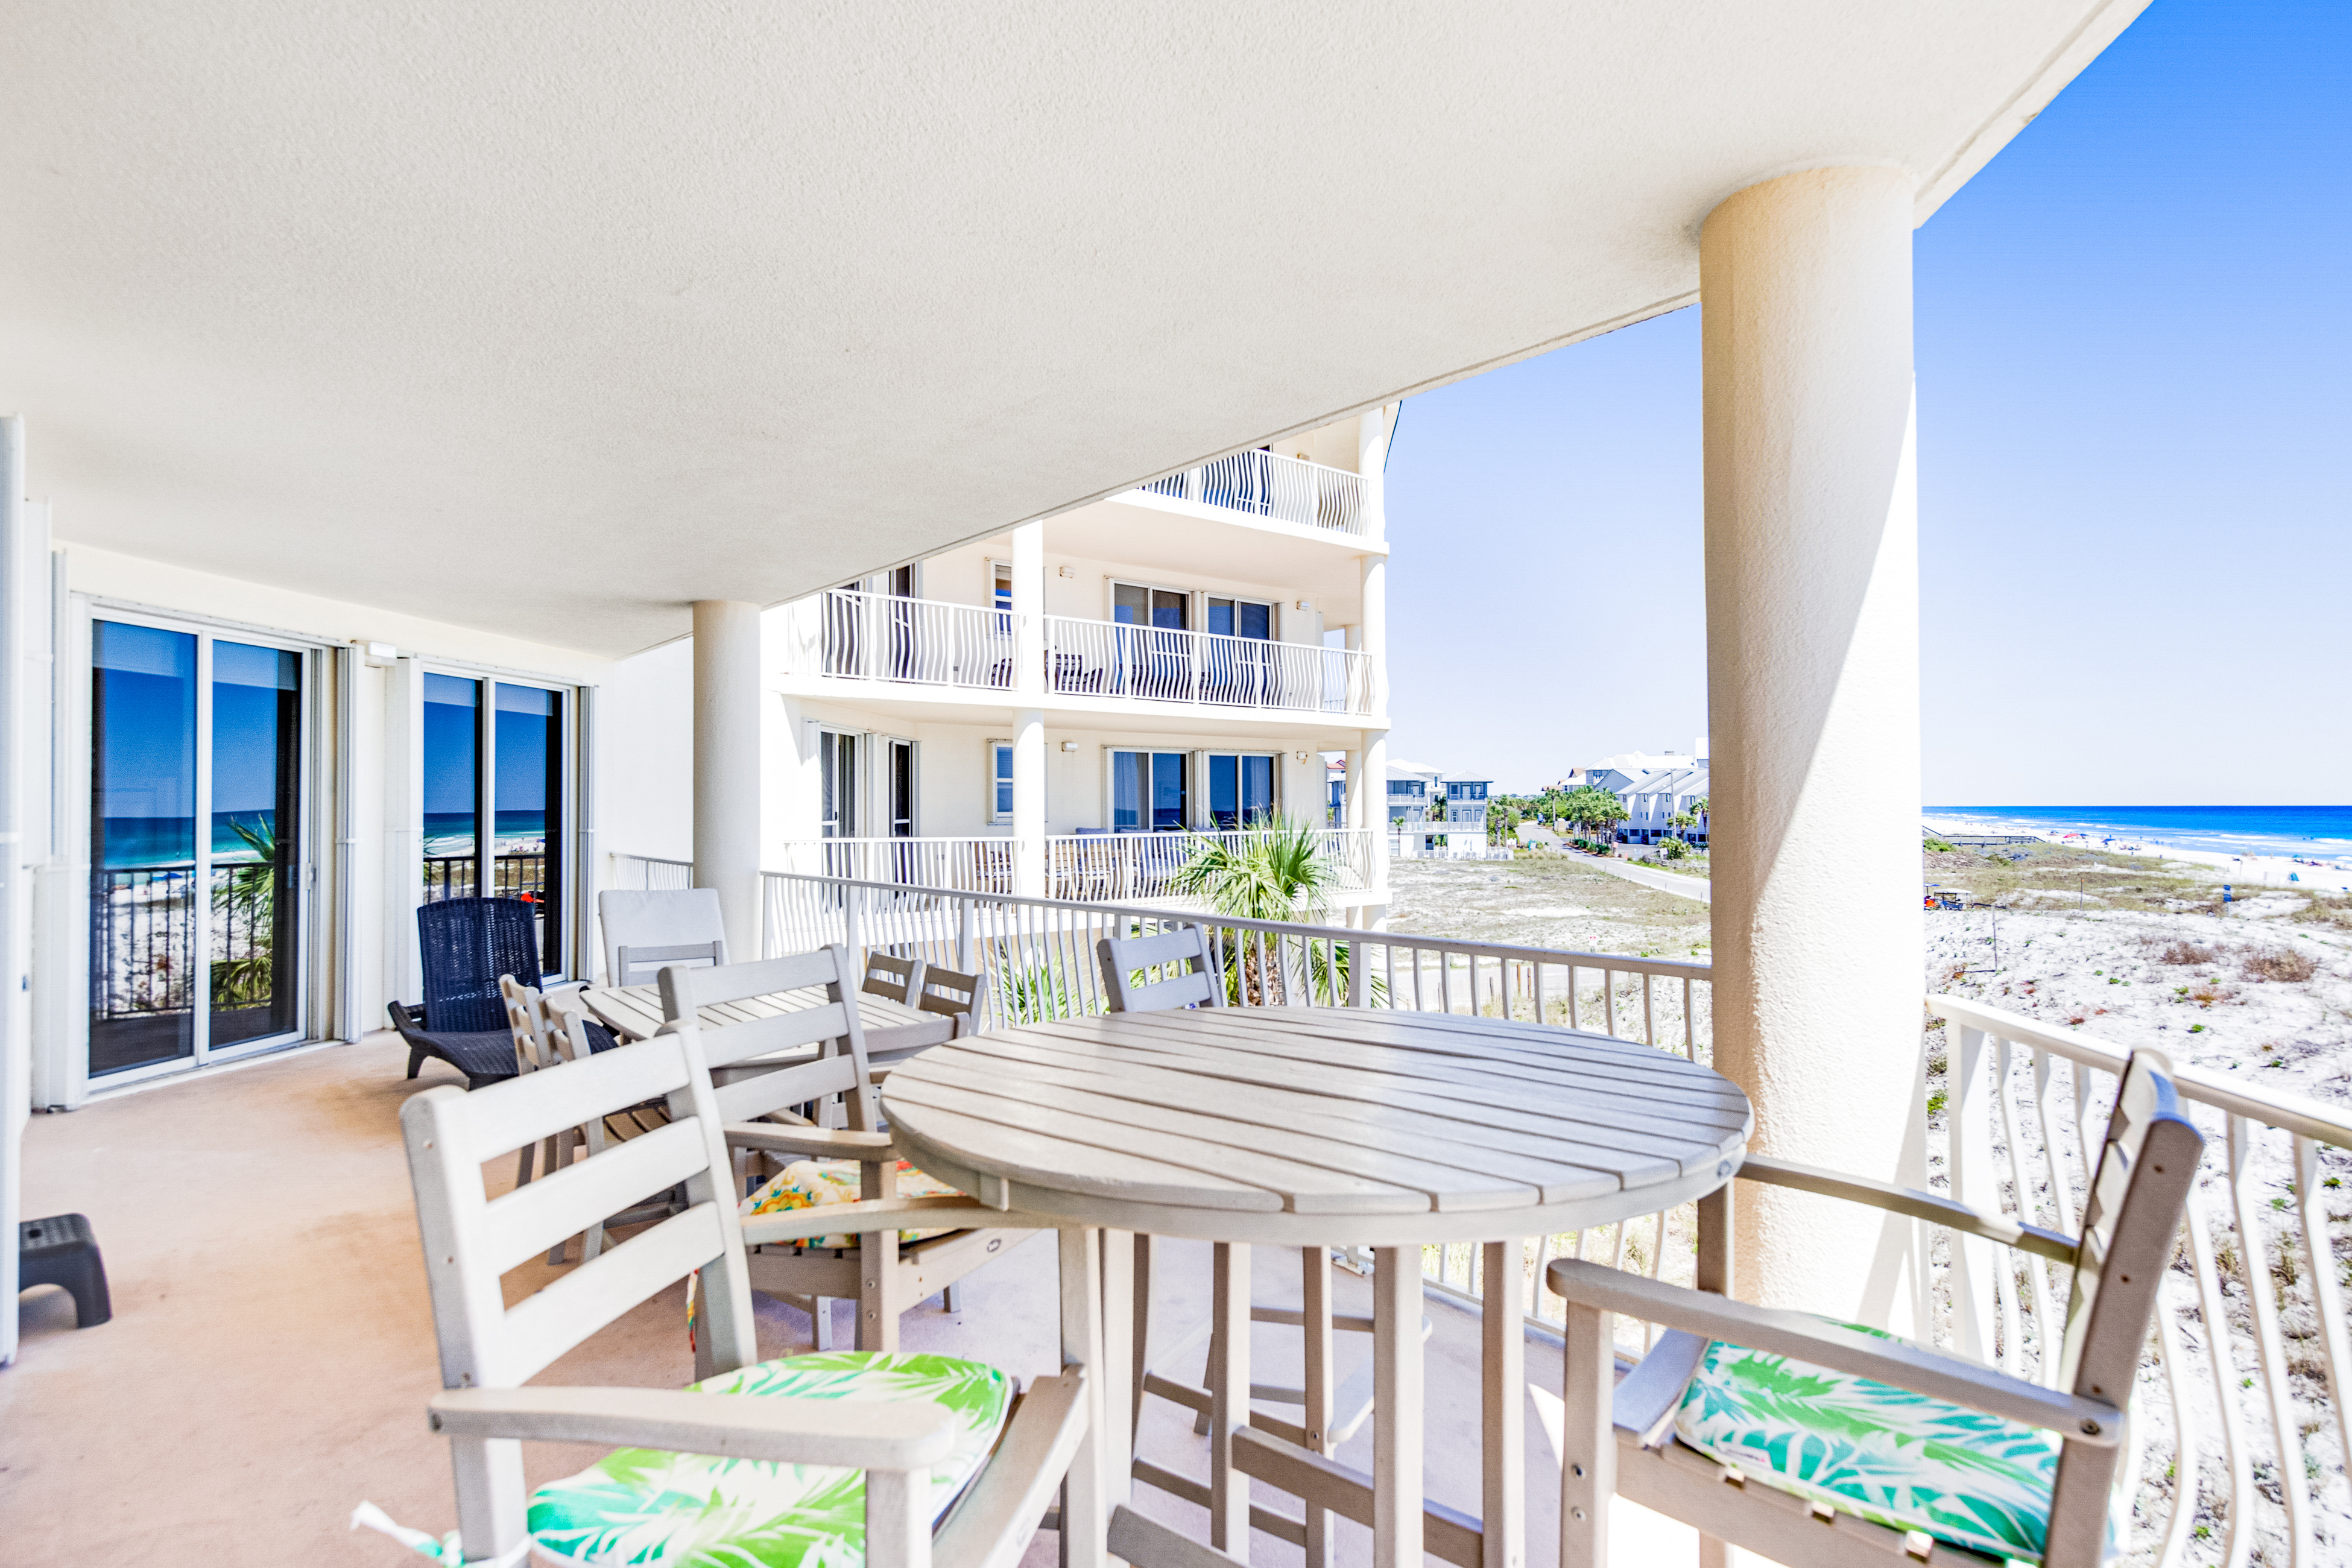 Dunes of Seagrove A210 Condo rental in Dunes of Seagrove in Highway 30-A Florida - #2